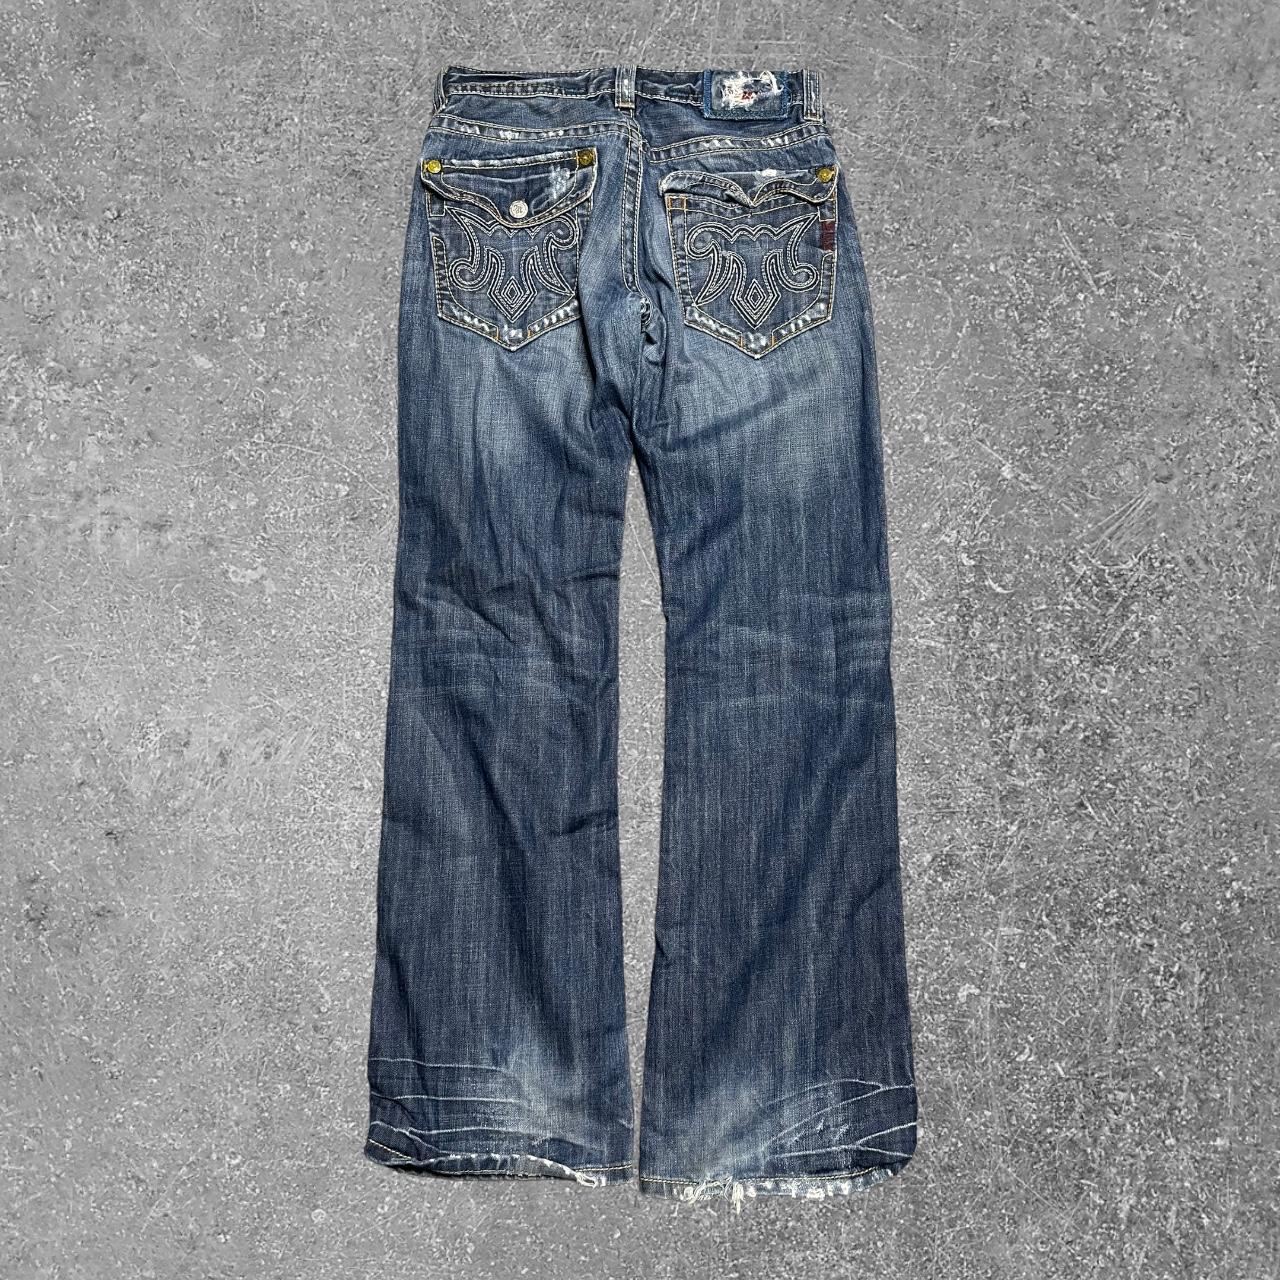 Men's Navy and Blue Jeans (2)